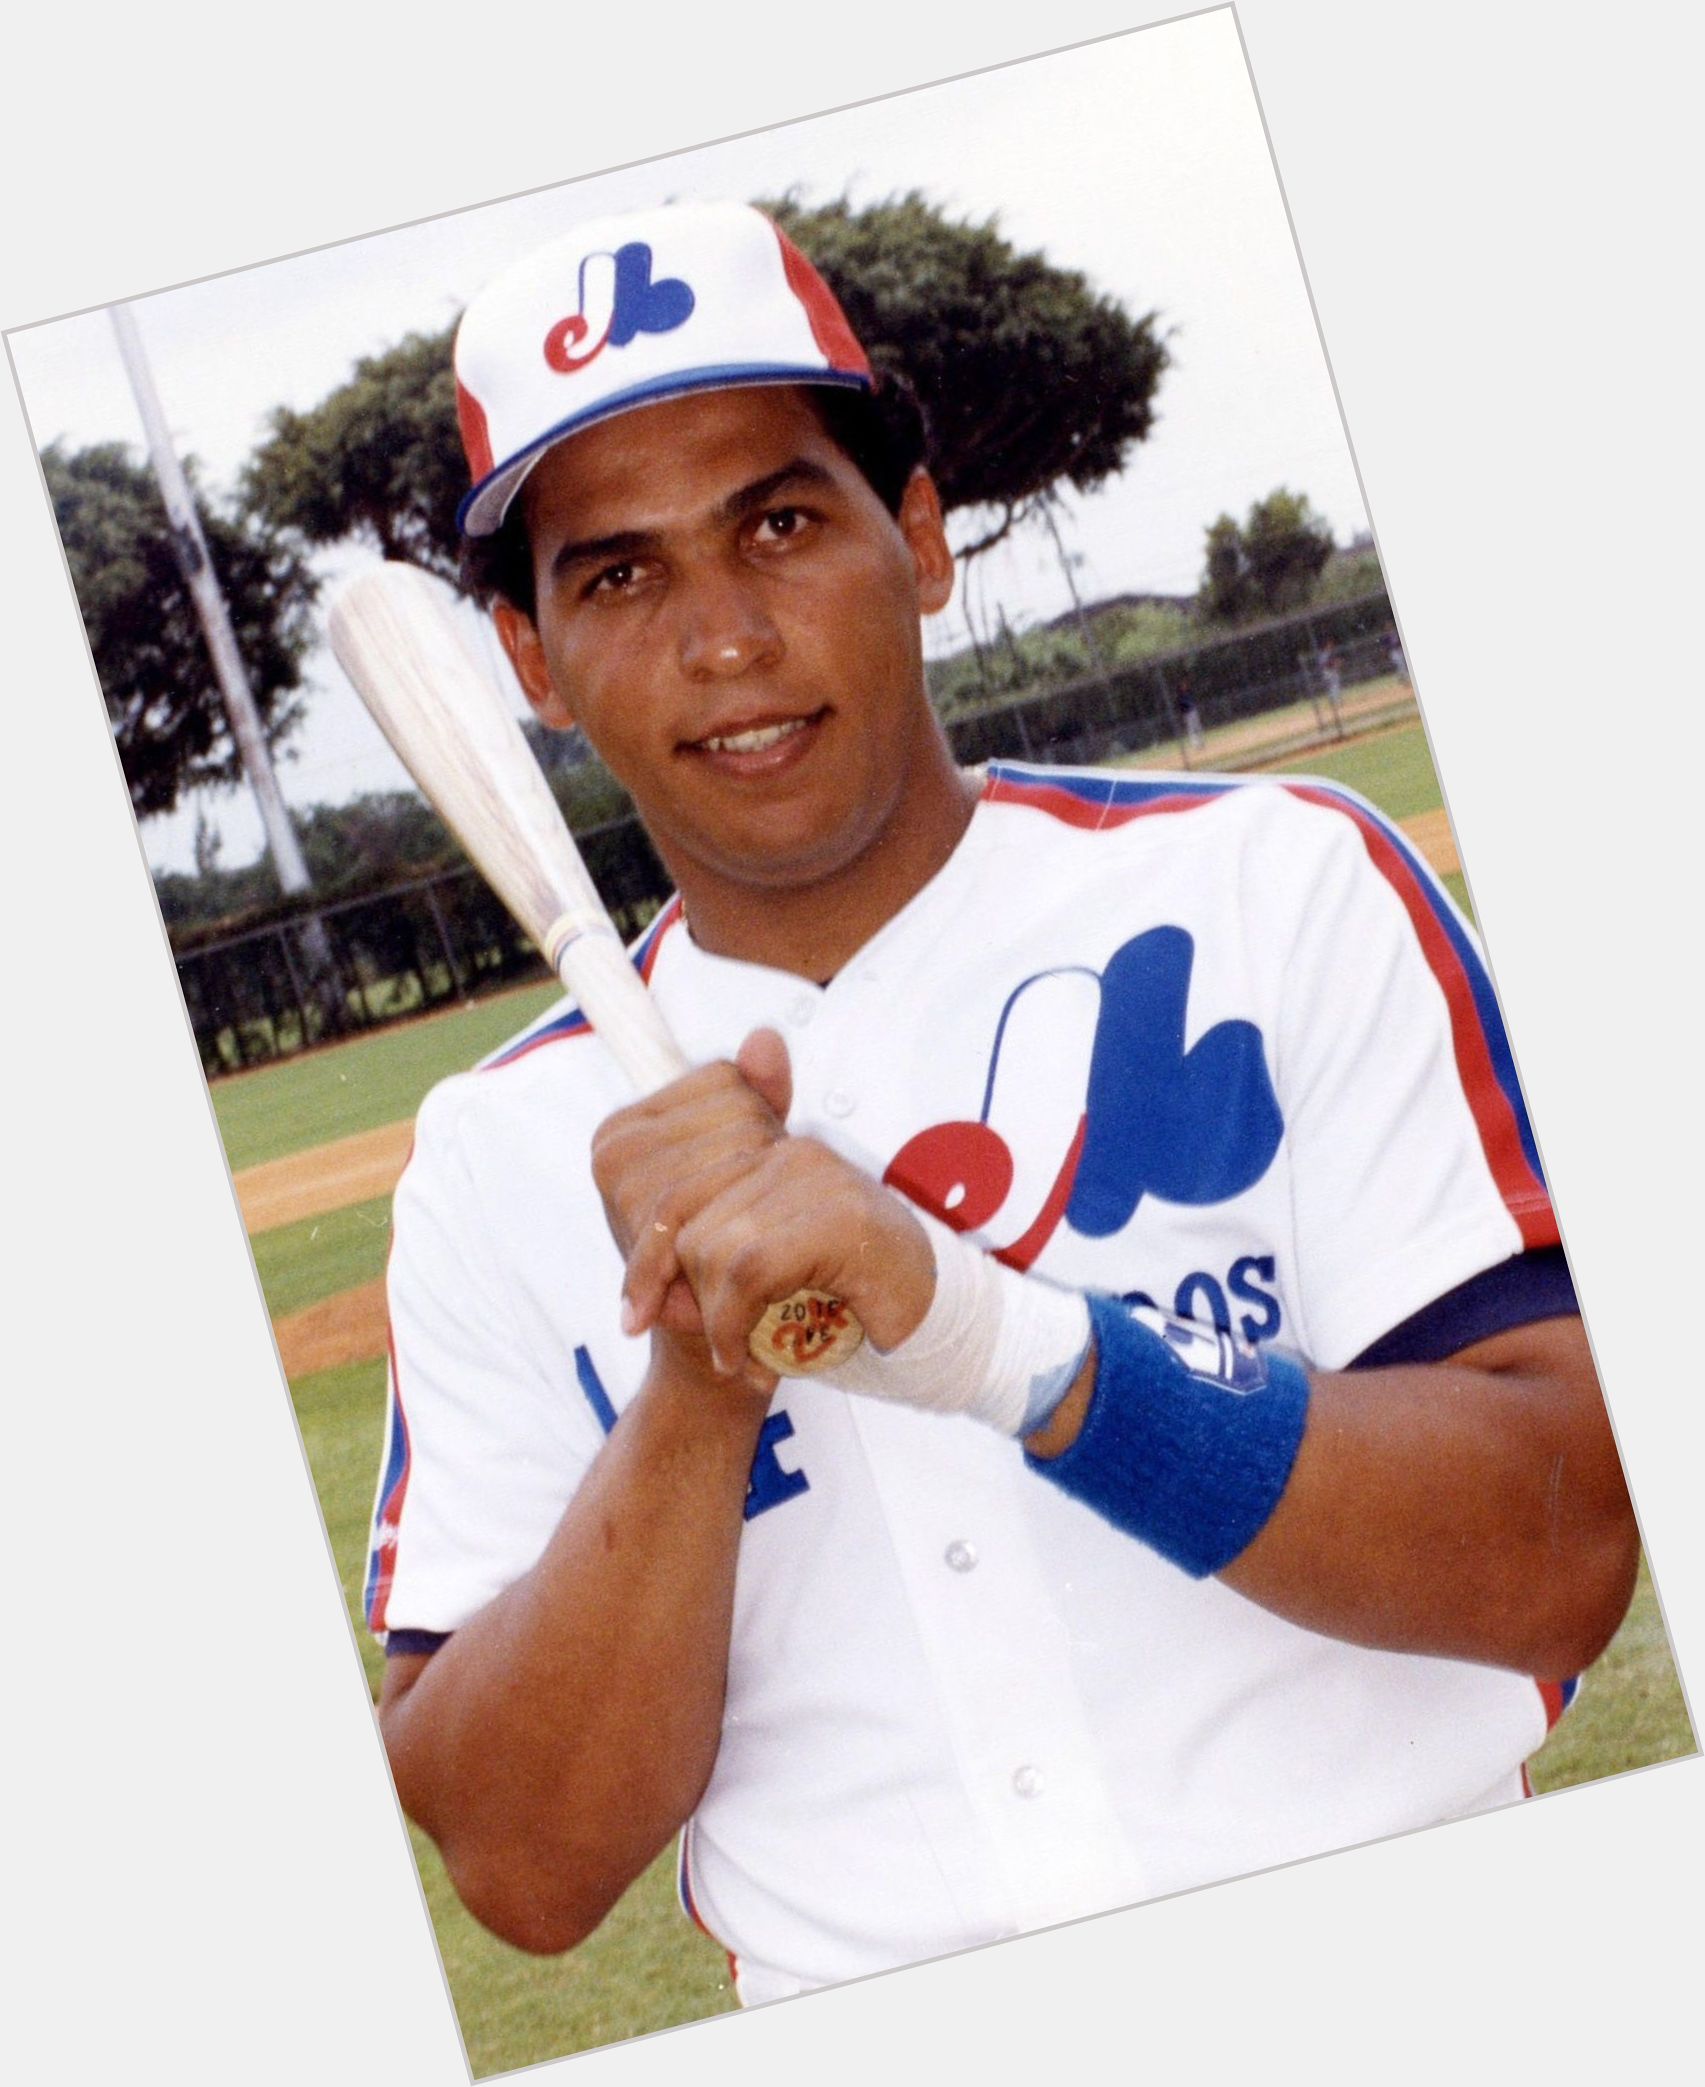 Http://fanpagepress.net/m/A/andres Galarraga Braves 0